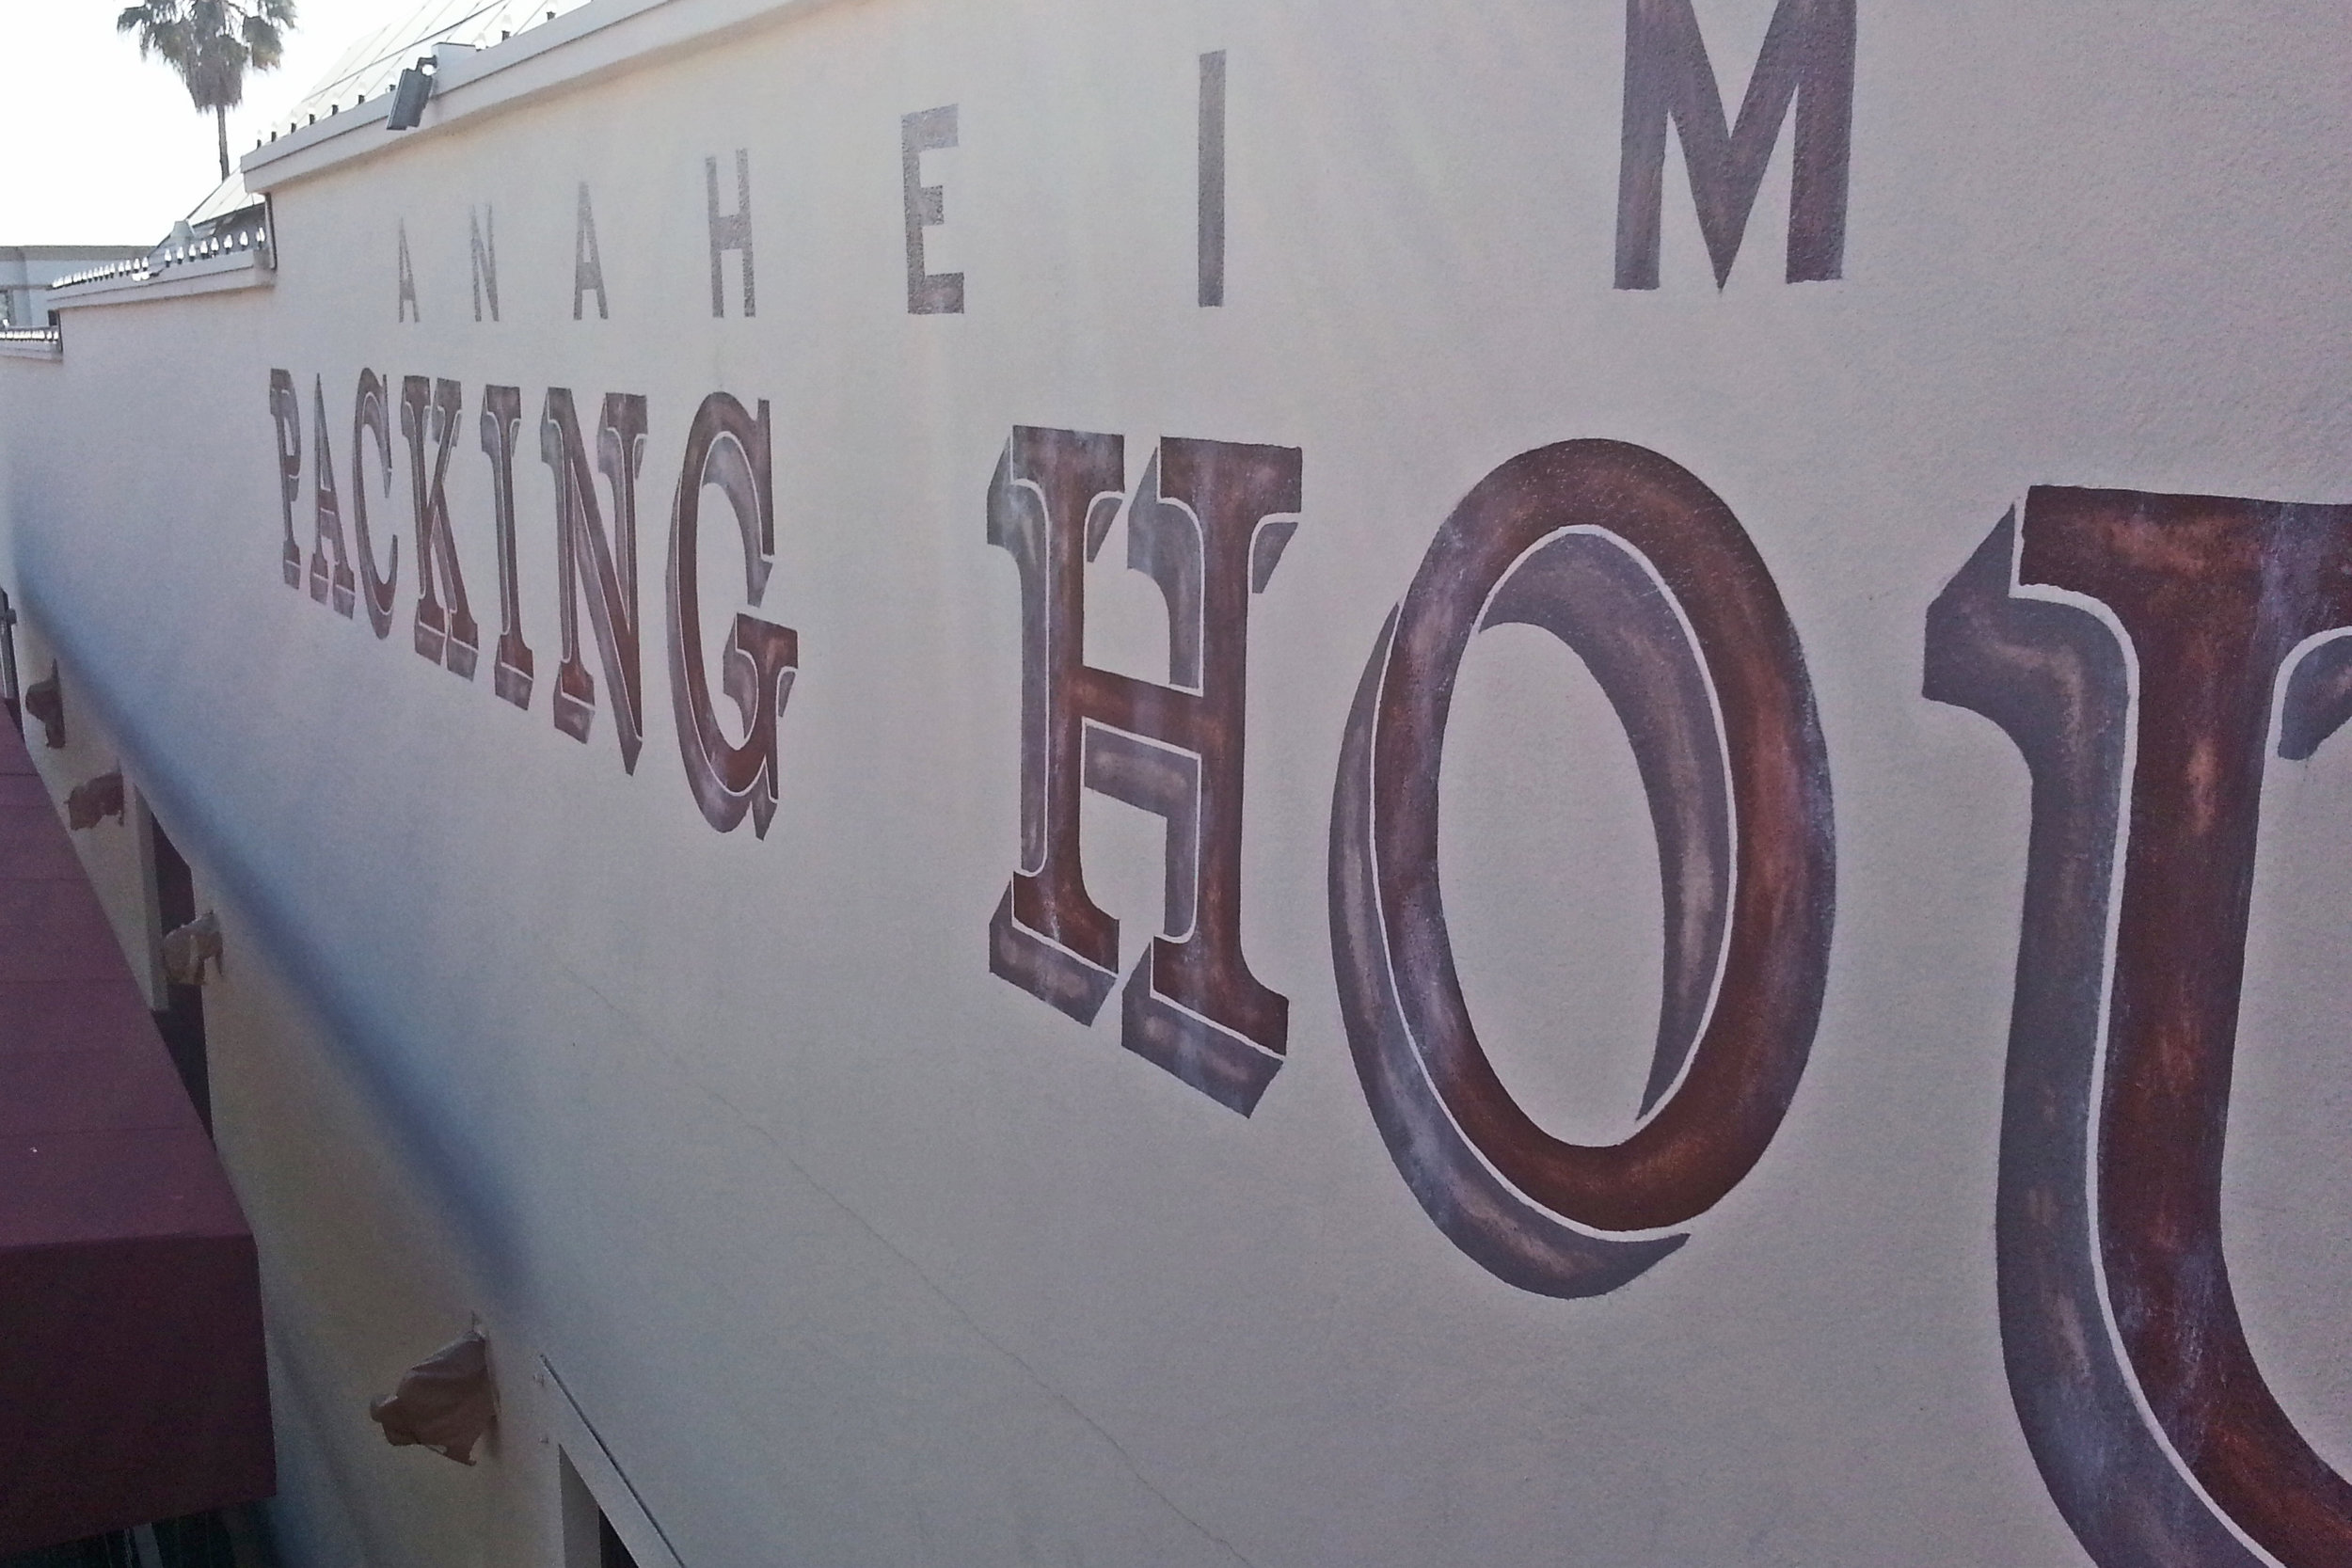 Anaheim Packing House - hand painted graphic mural distressed lettering detail